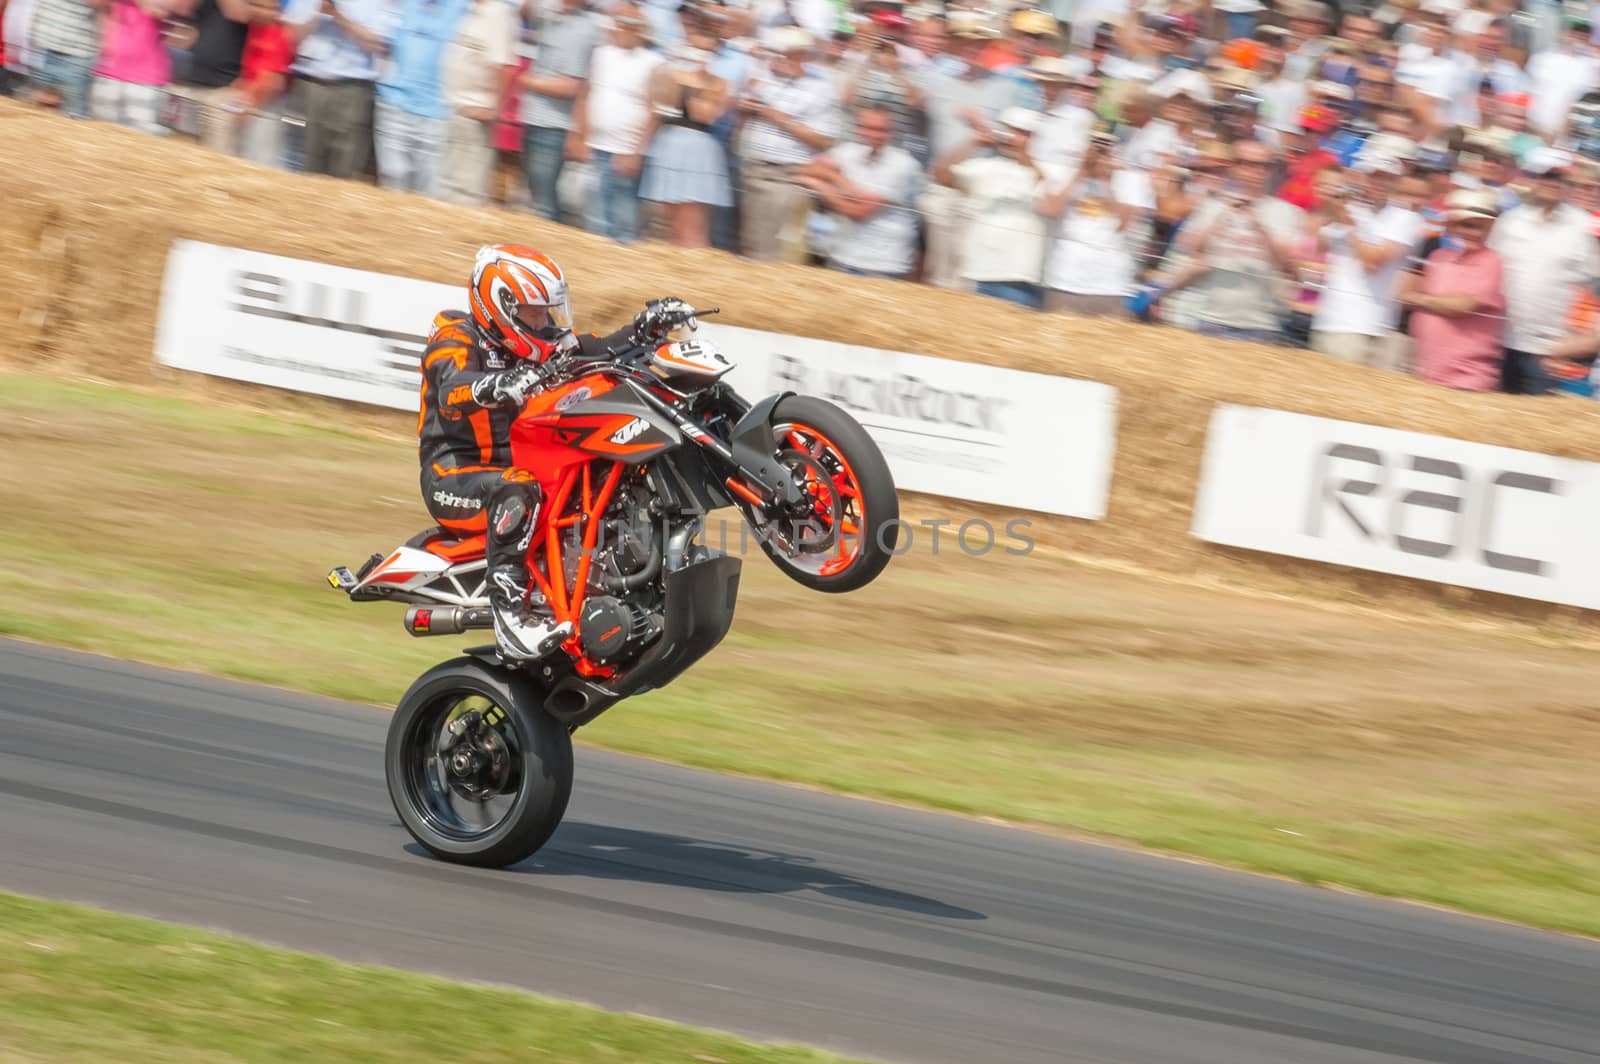 Goodwood, UK - July 13, 2013: Veteran MotoGP rider Jeremy McWilliams on the KTM 1290 Super Duke prototype motorcycle at the Festival of Speed event held at Goodwood, UK